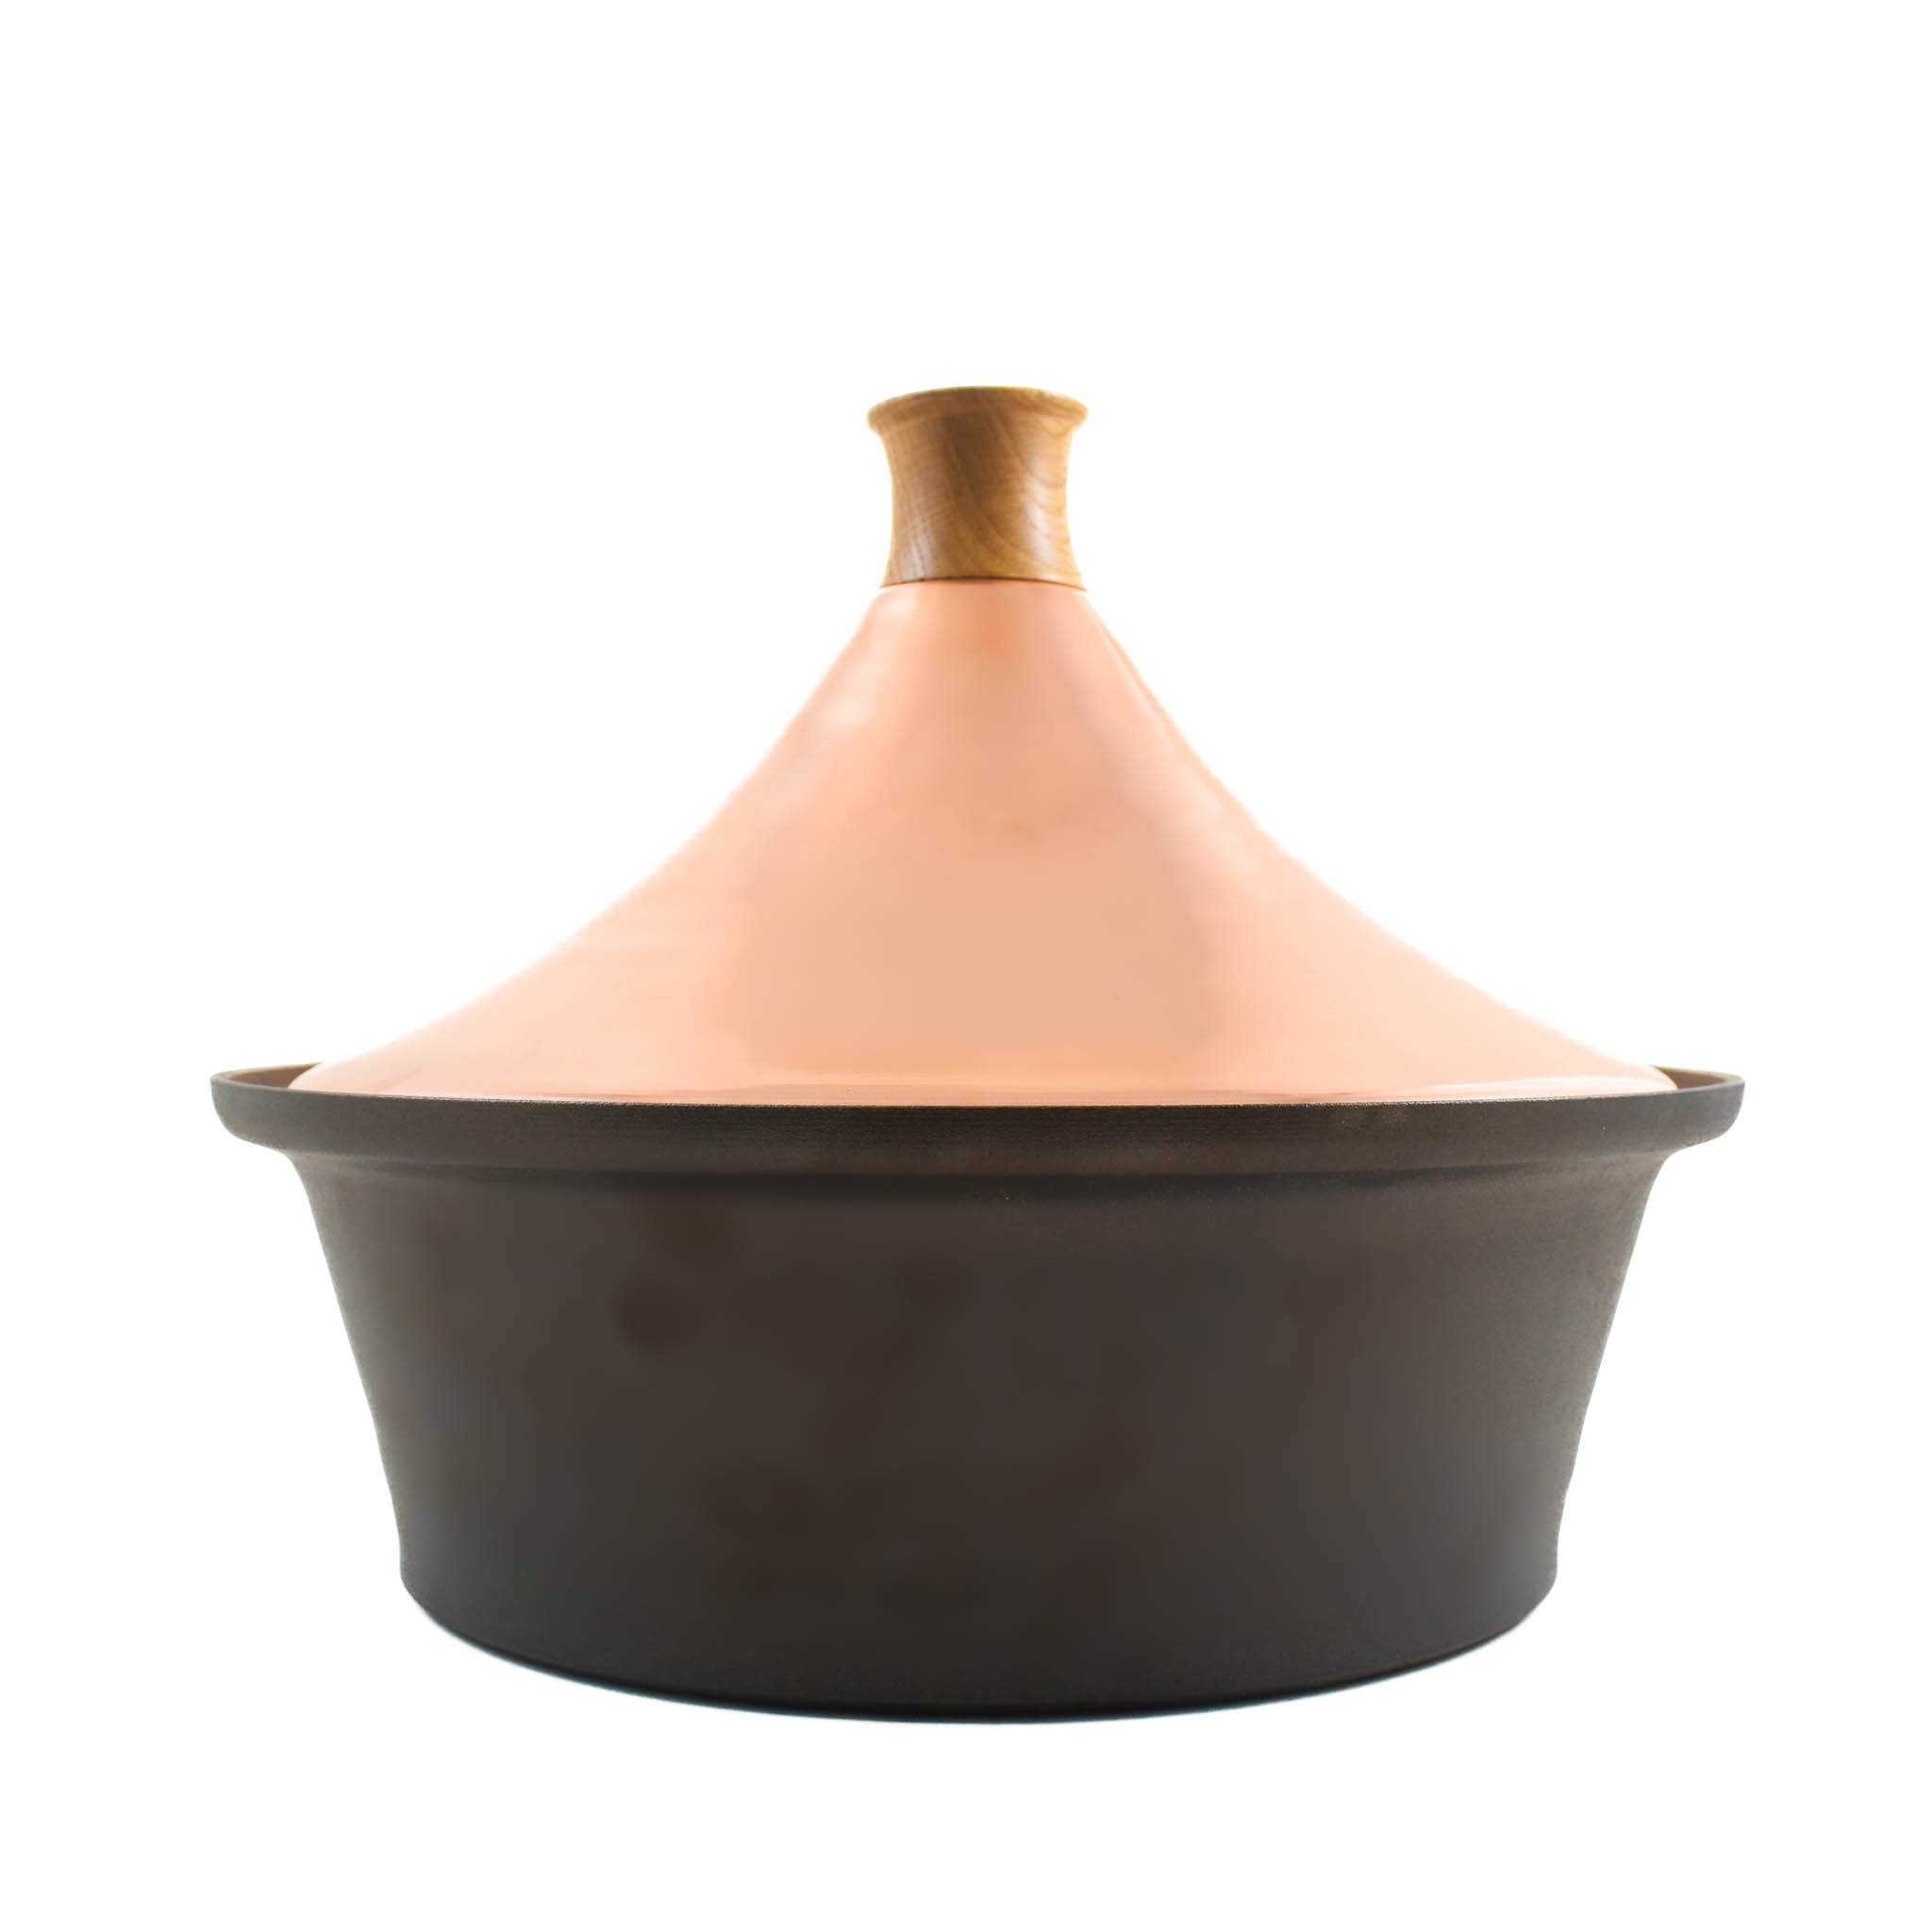 Netherton Foundry Copper Tagine with Spun Iron Base, 7 litre